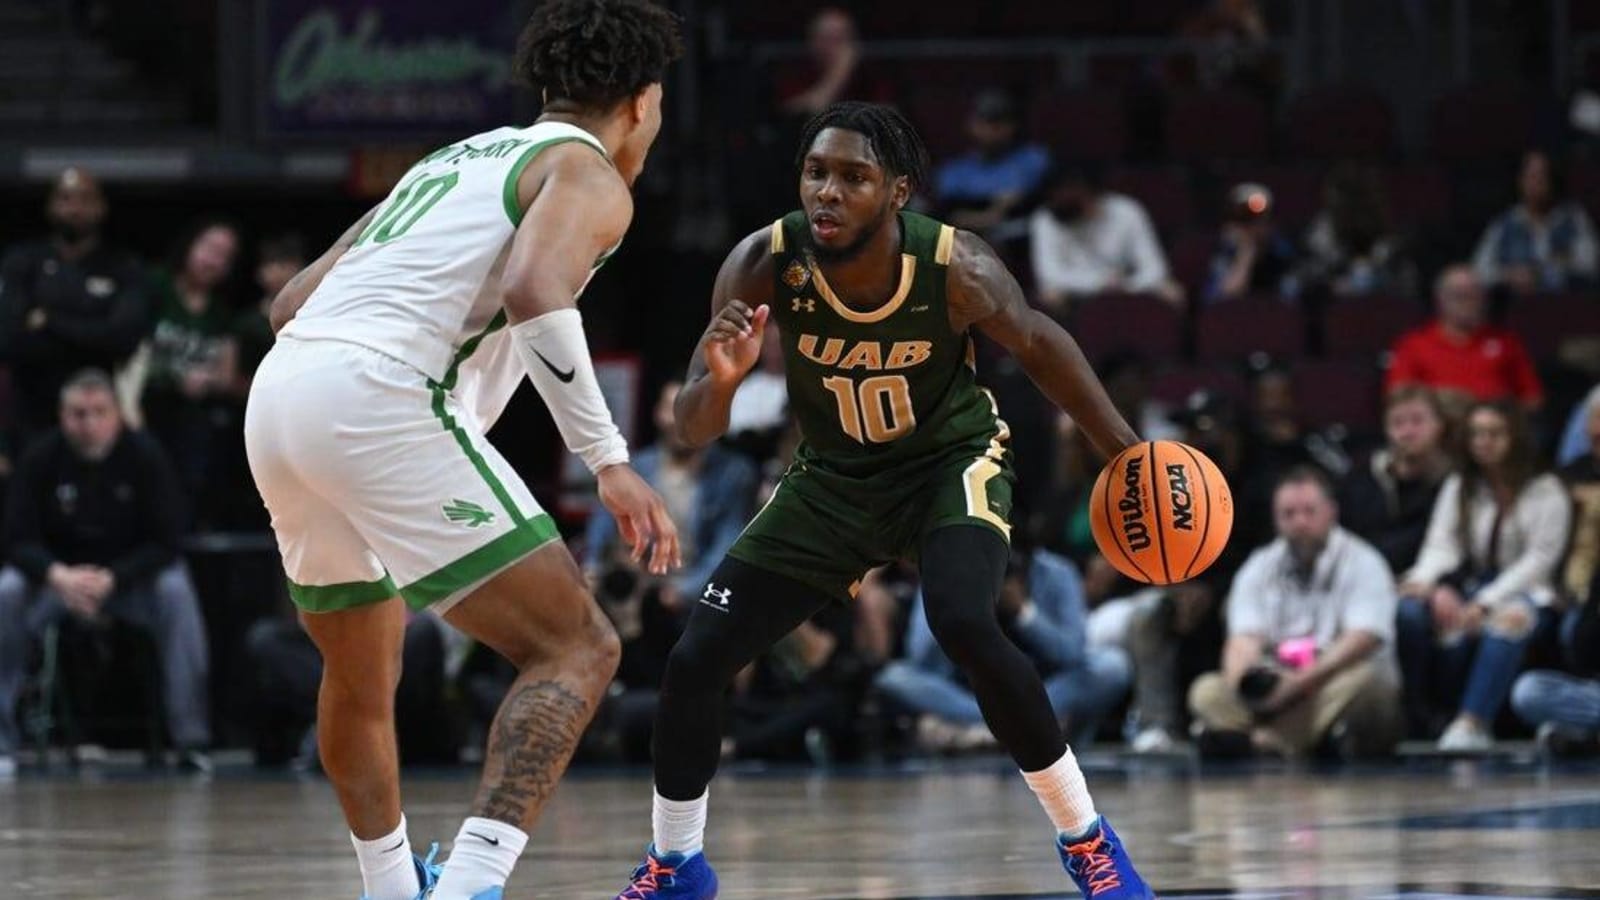 North Texas tops UAB for first NIT title